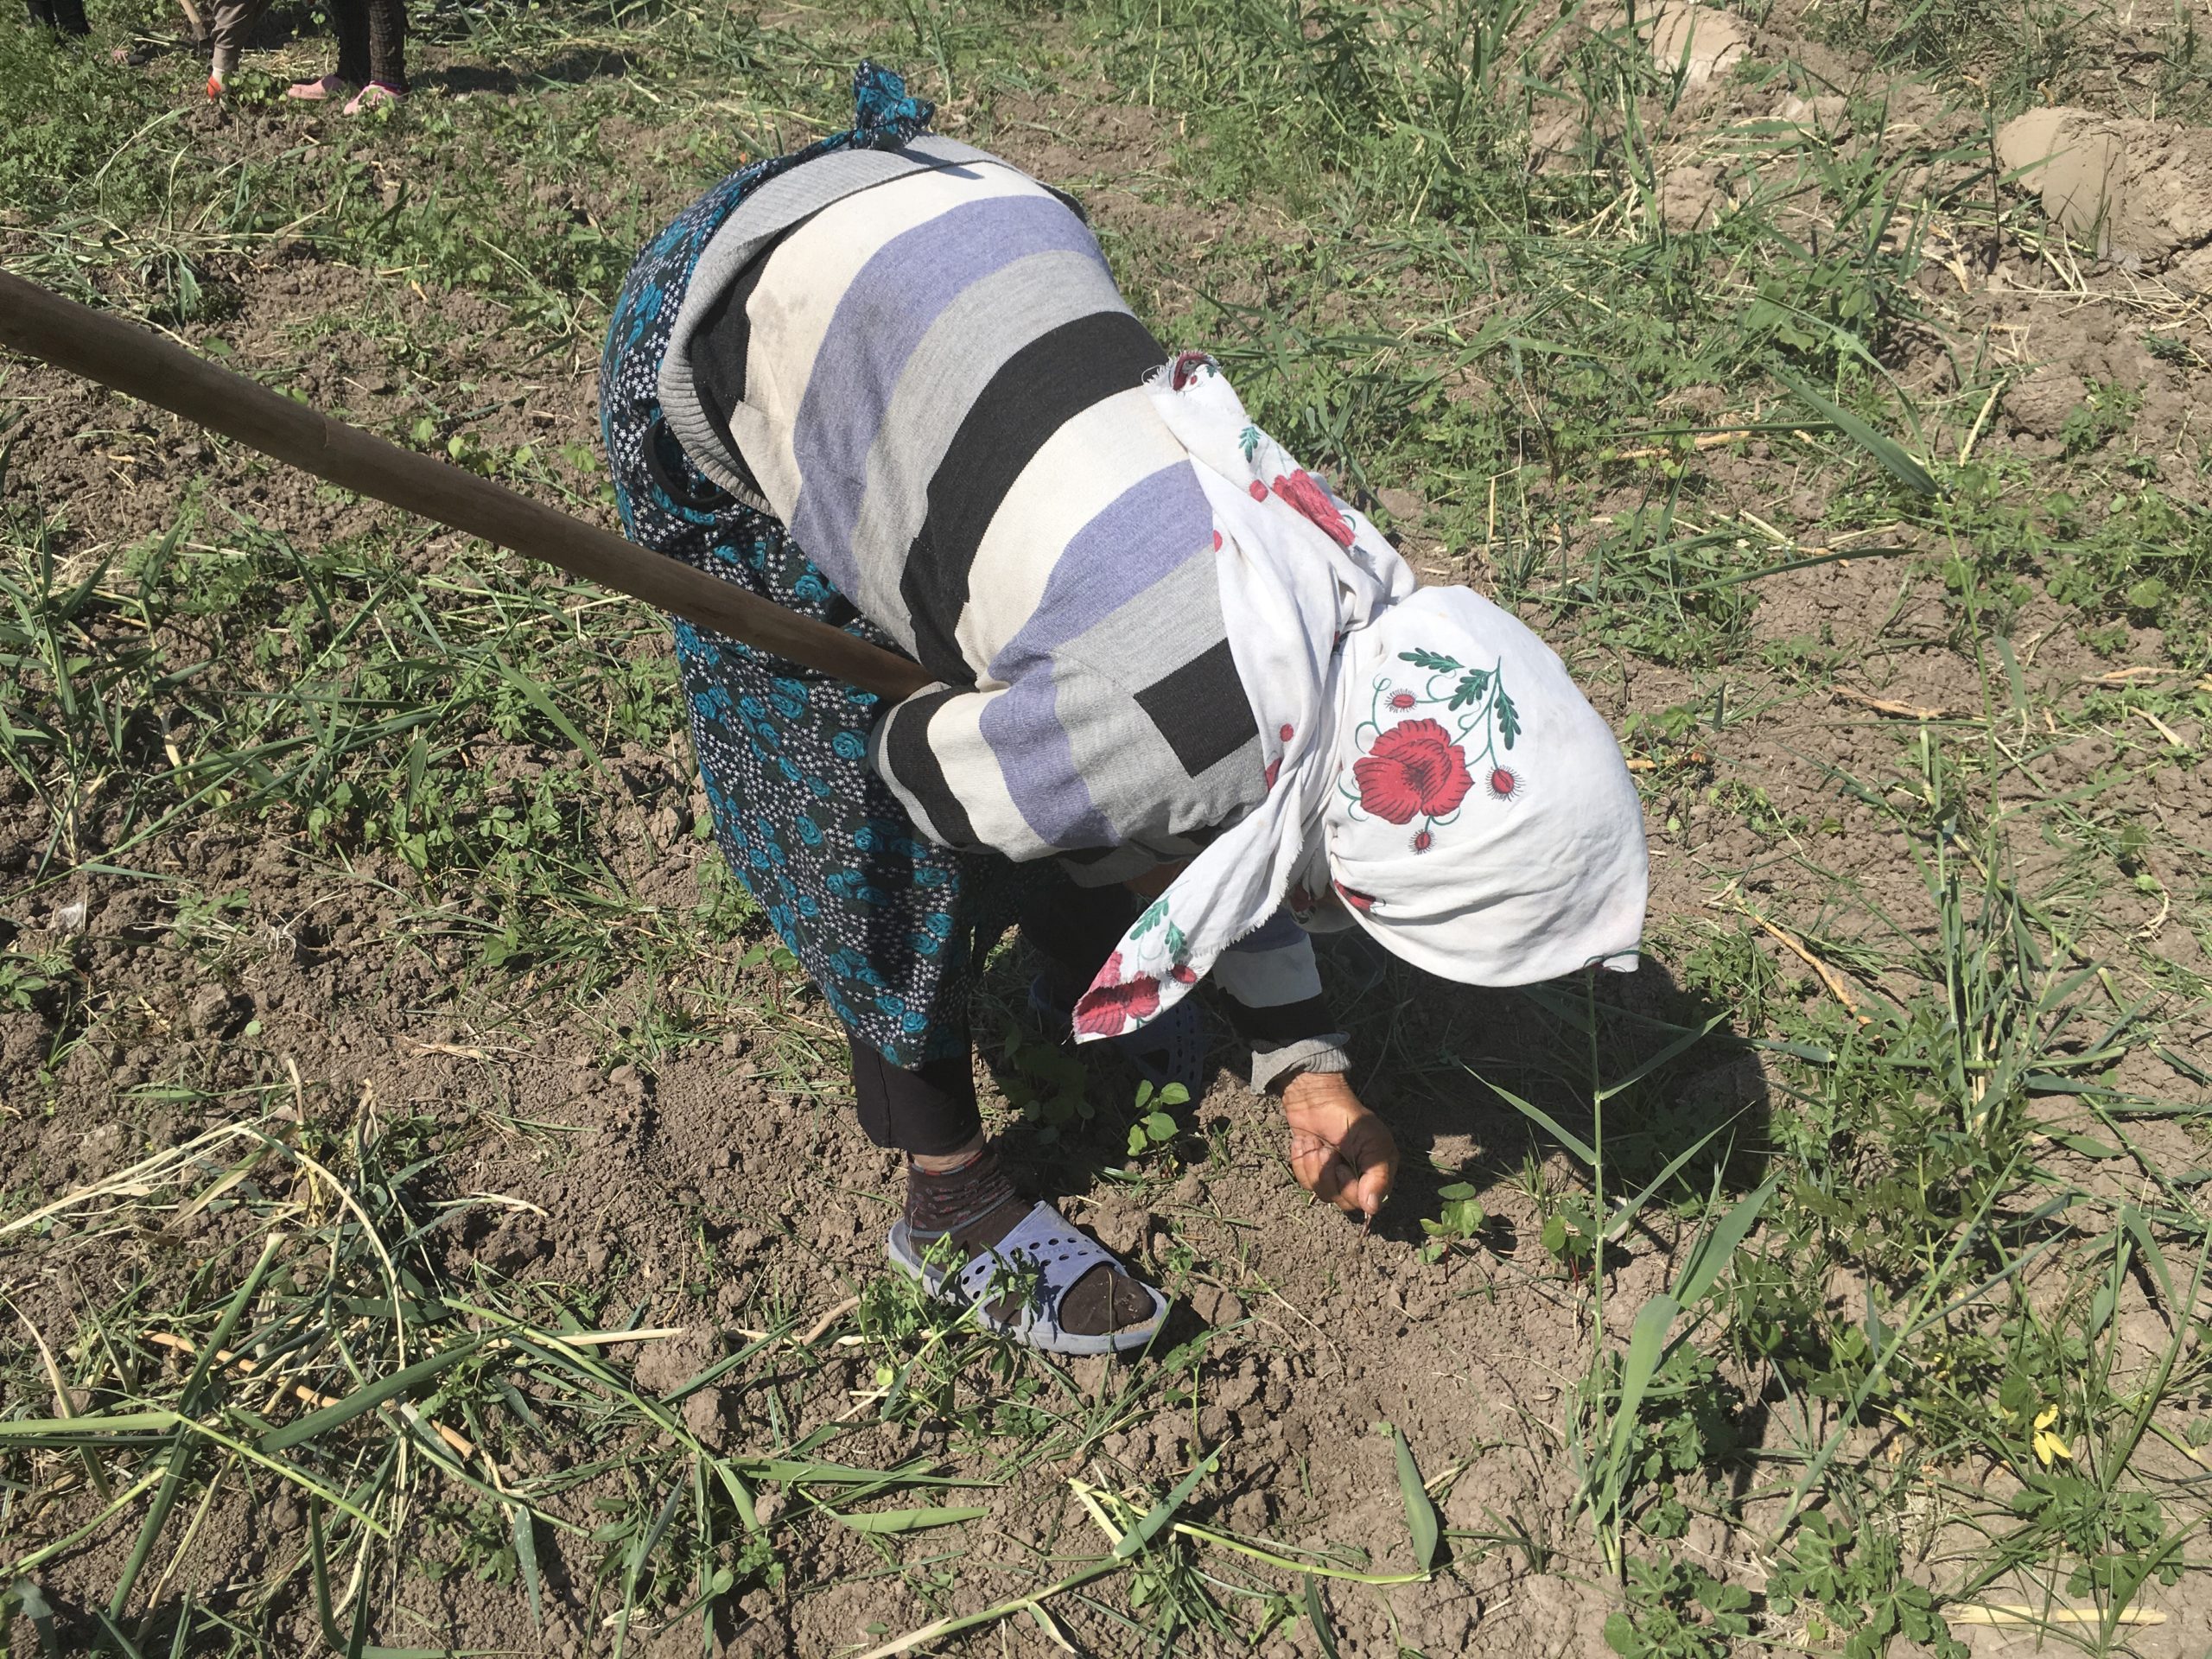 Pulling weeds without gloves in an Imishli field